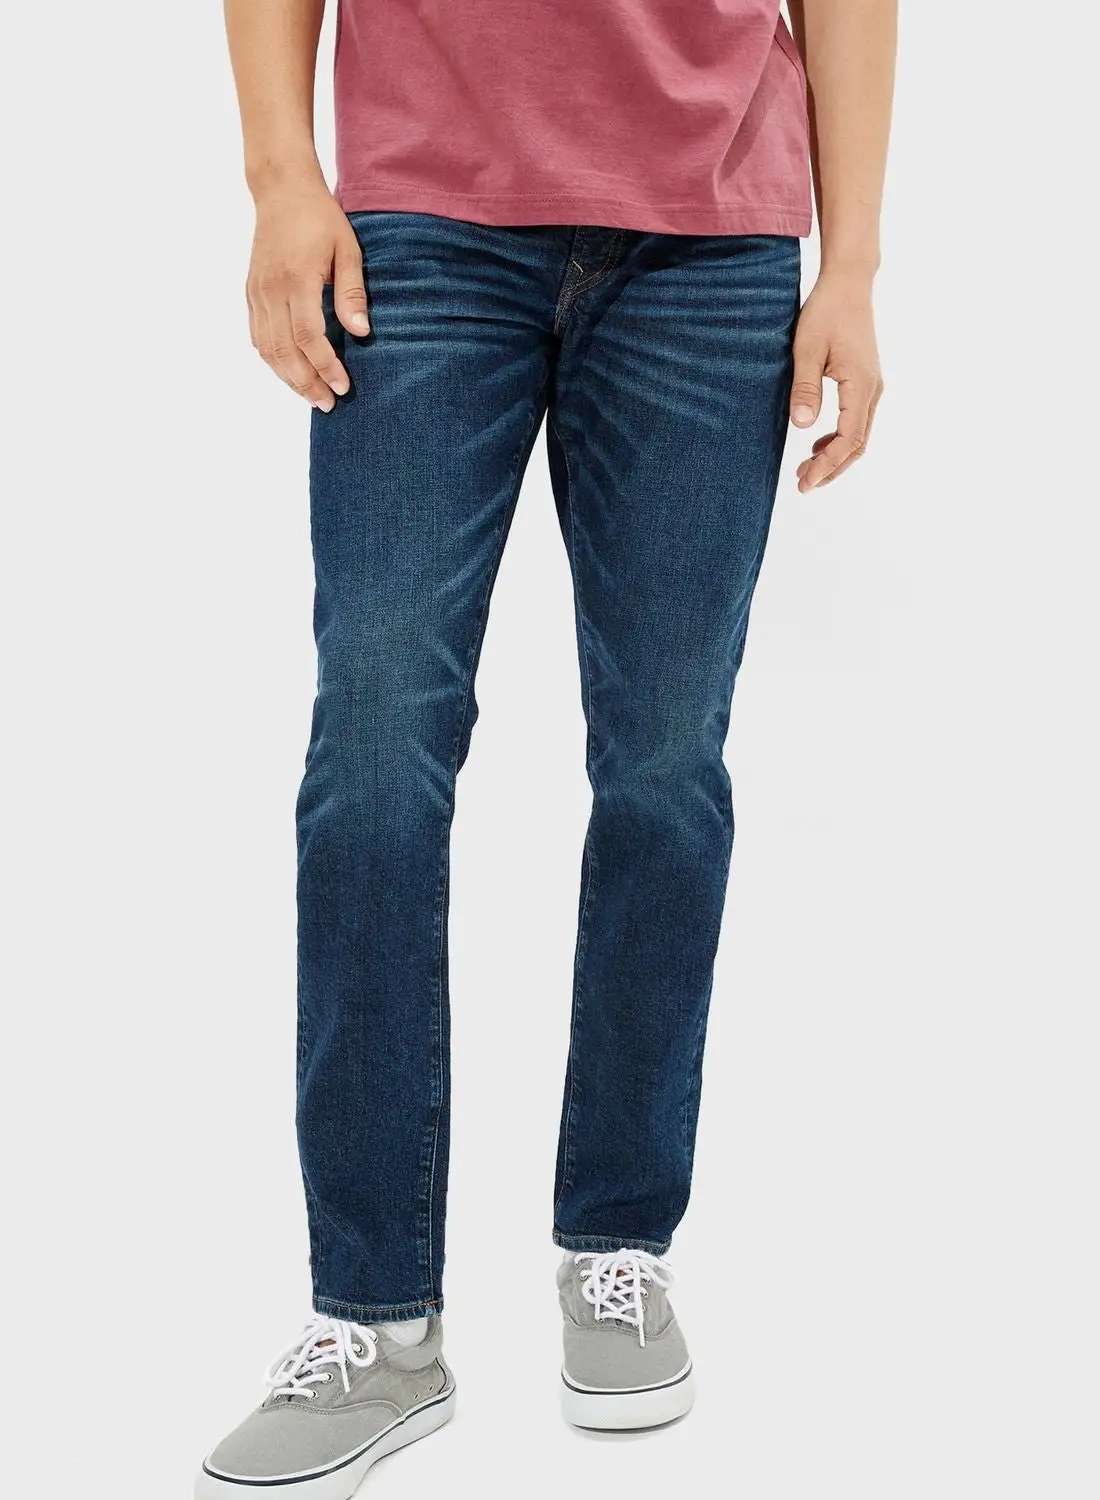 American Eagle Rinse Skinny Fit Jeans